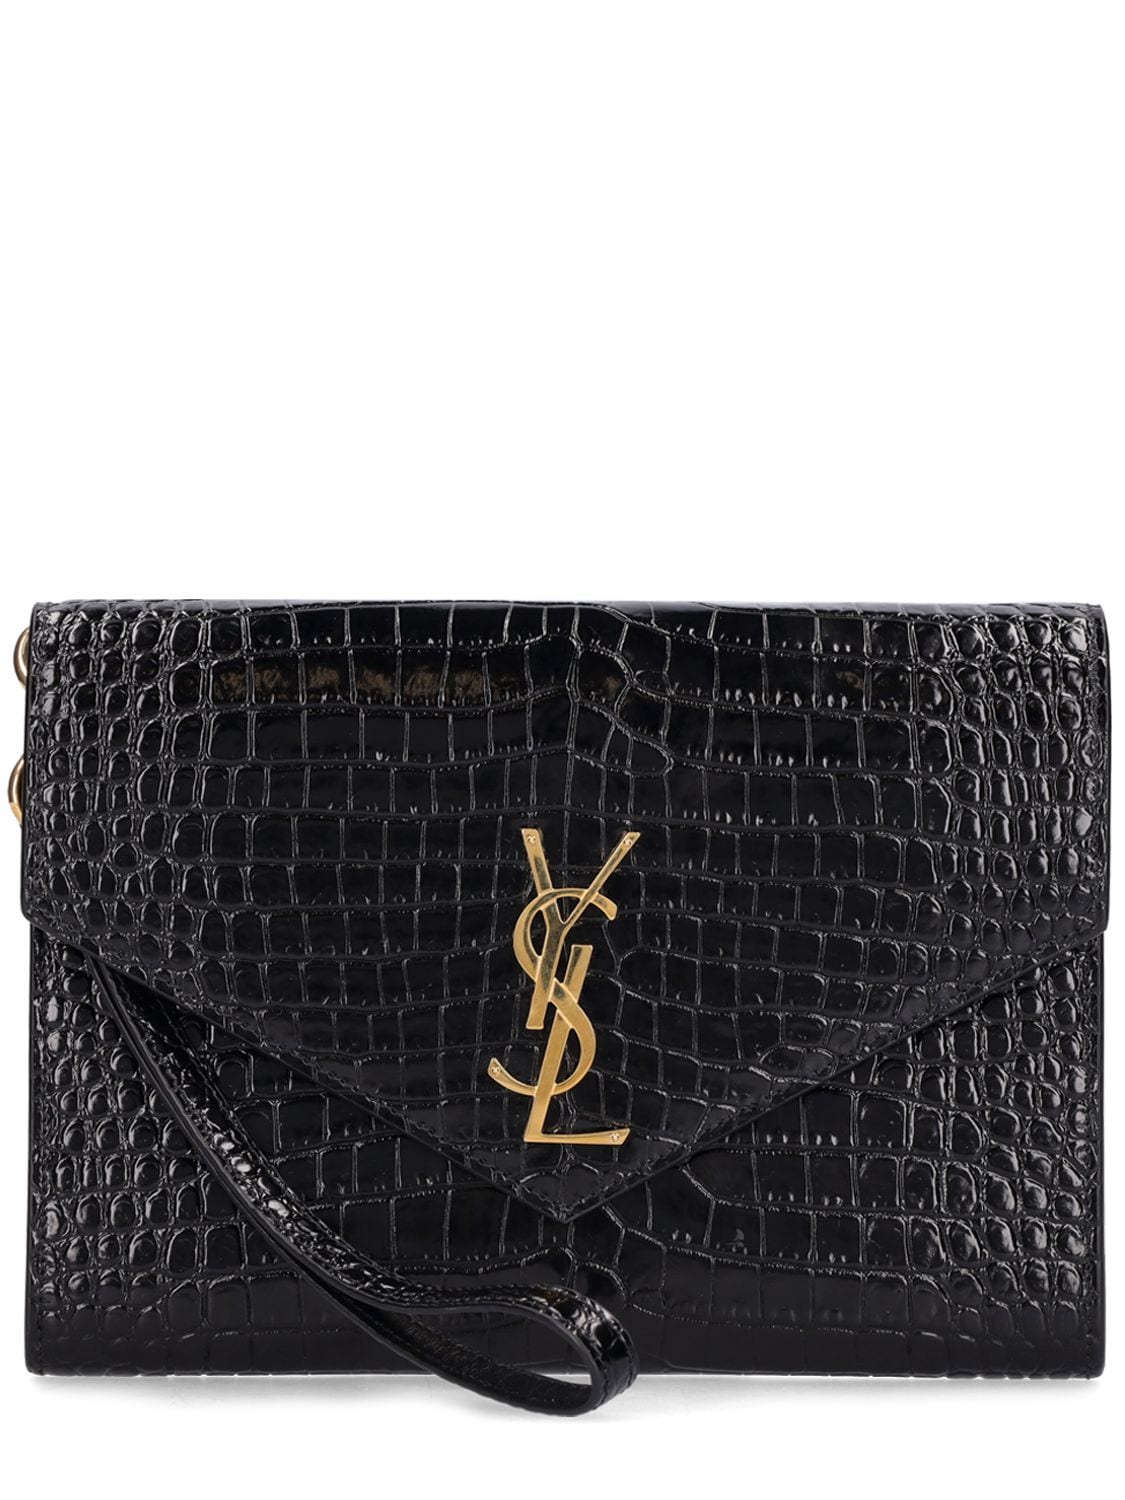 Image of Monogram Leather Pouch